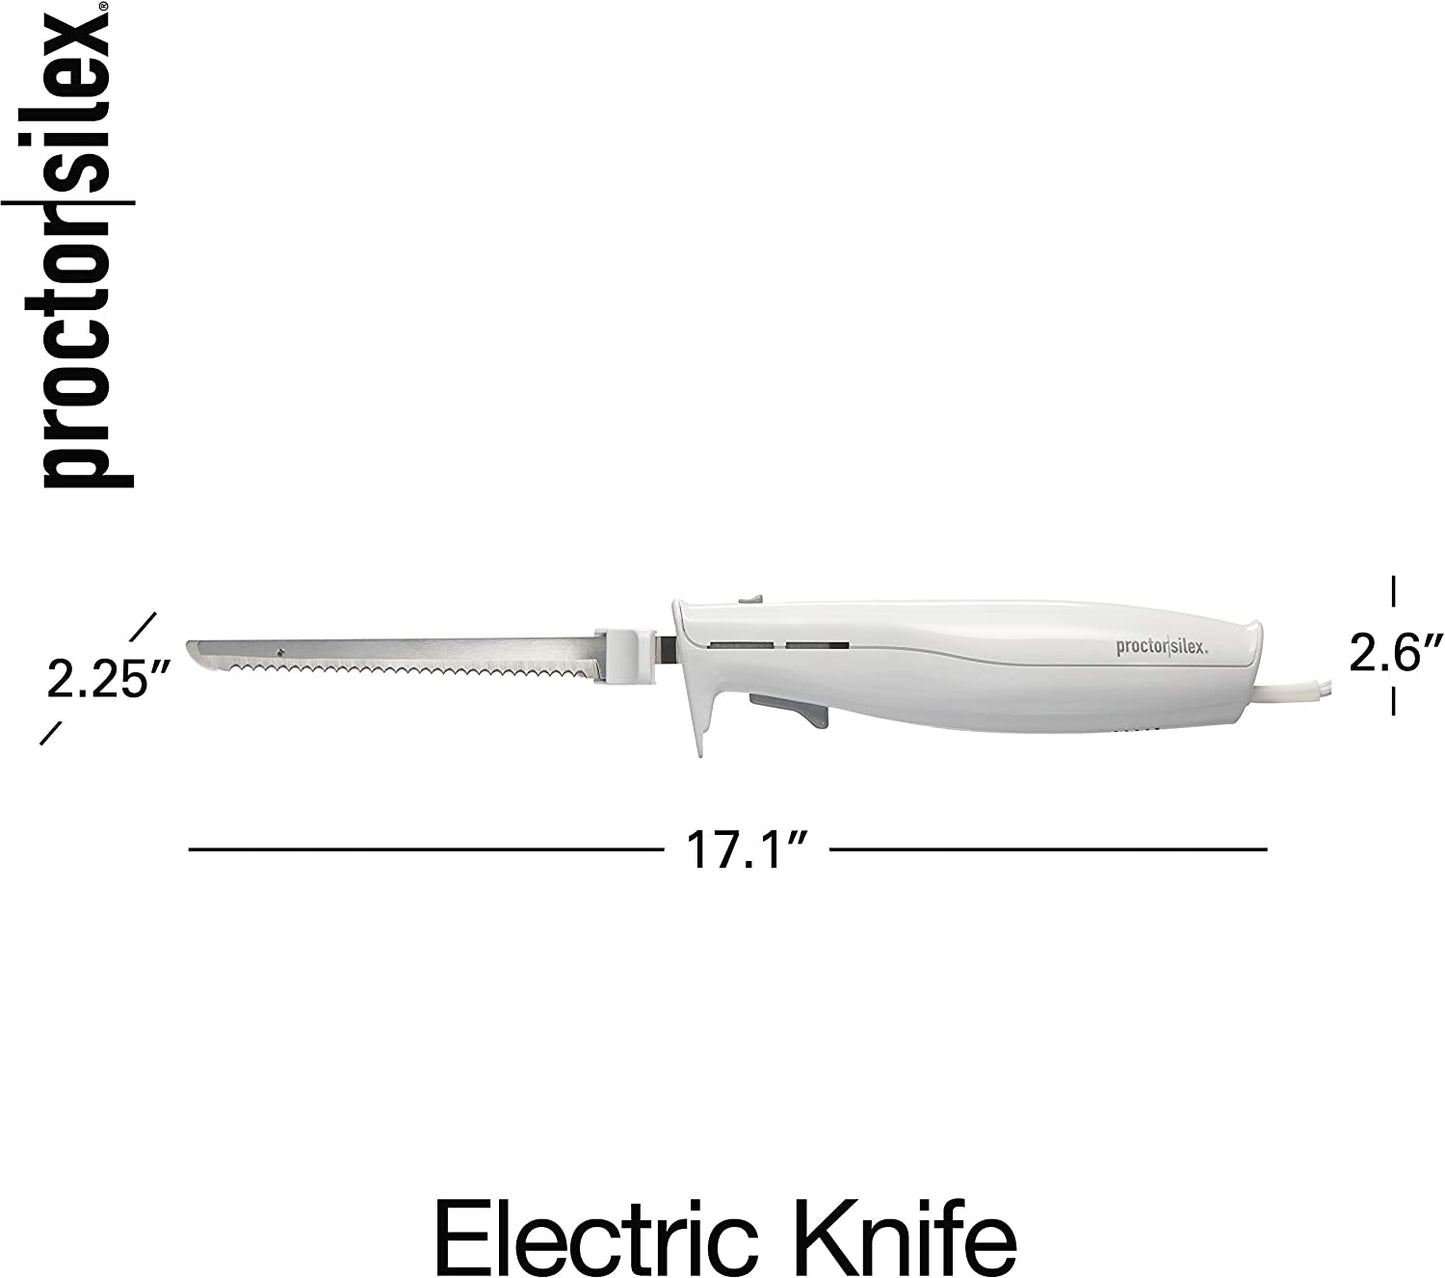 Easy Slice Electric Knife for Carving Meats, Poultry, Bread, Crafting Foam and More, Lightweight with Contoured Grip, White